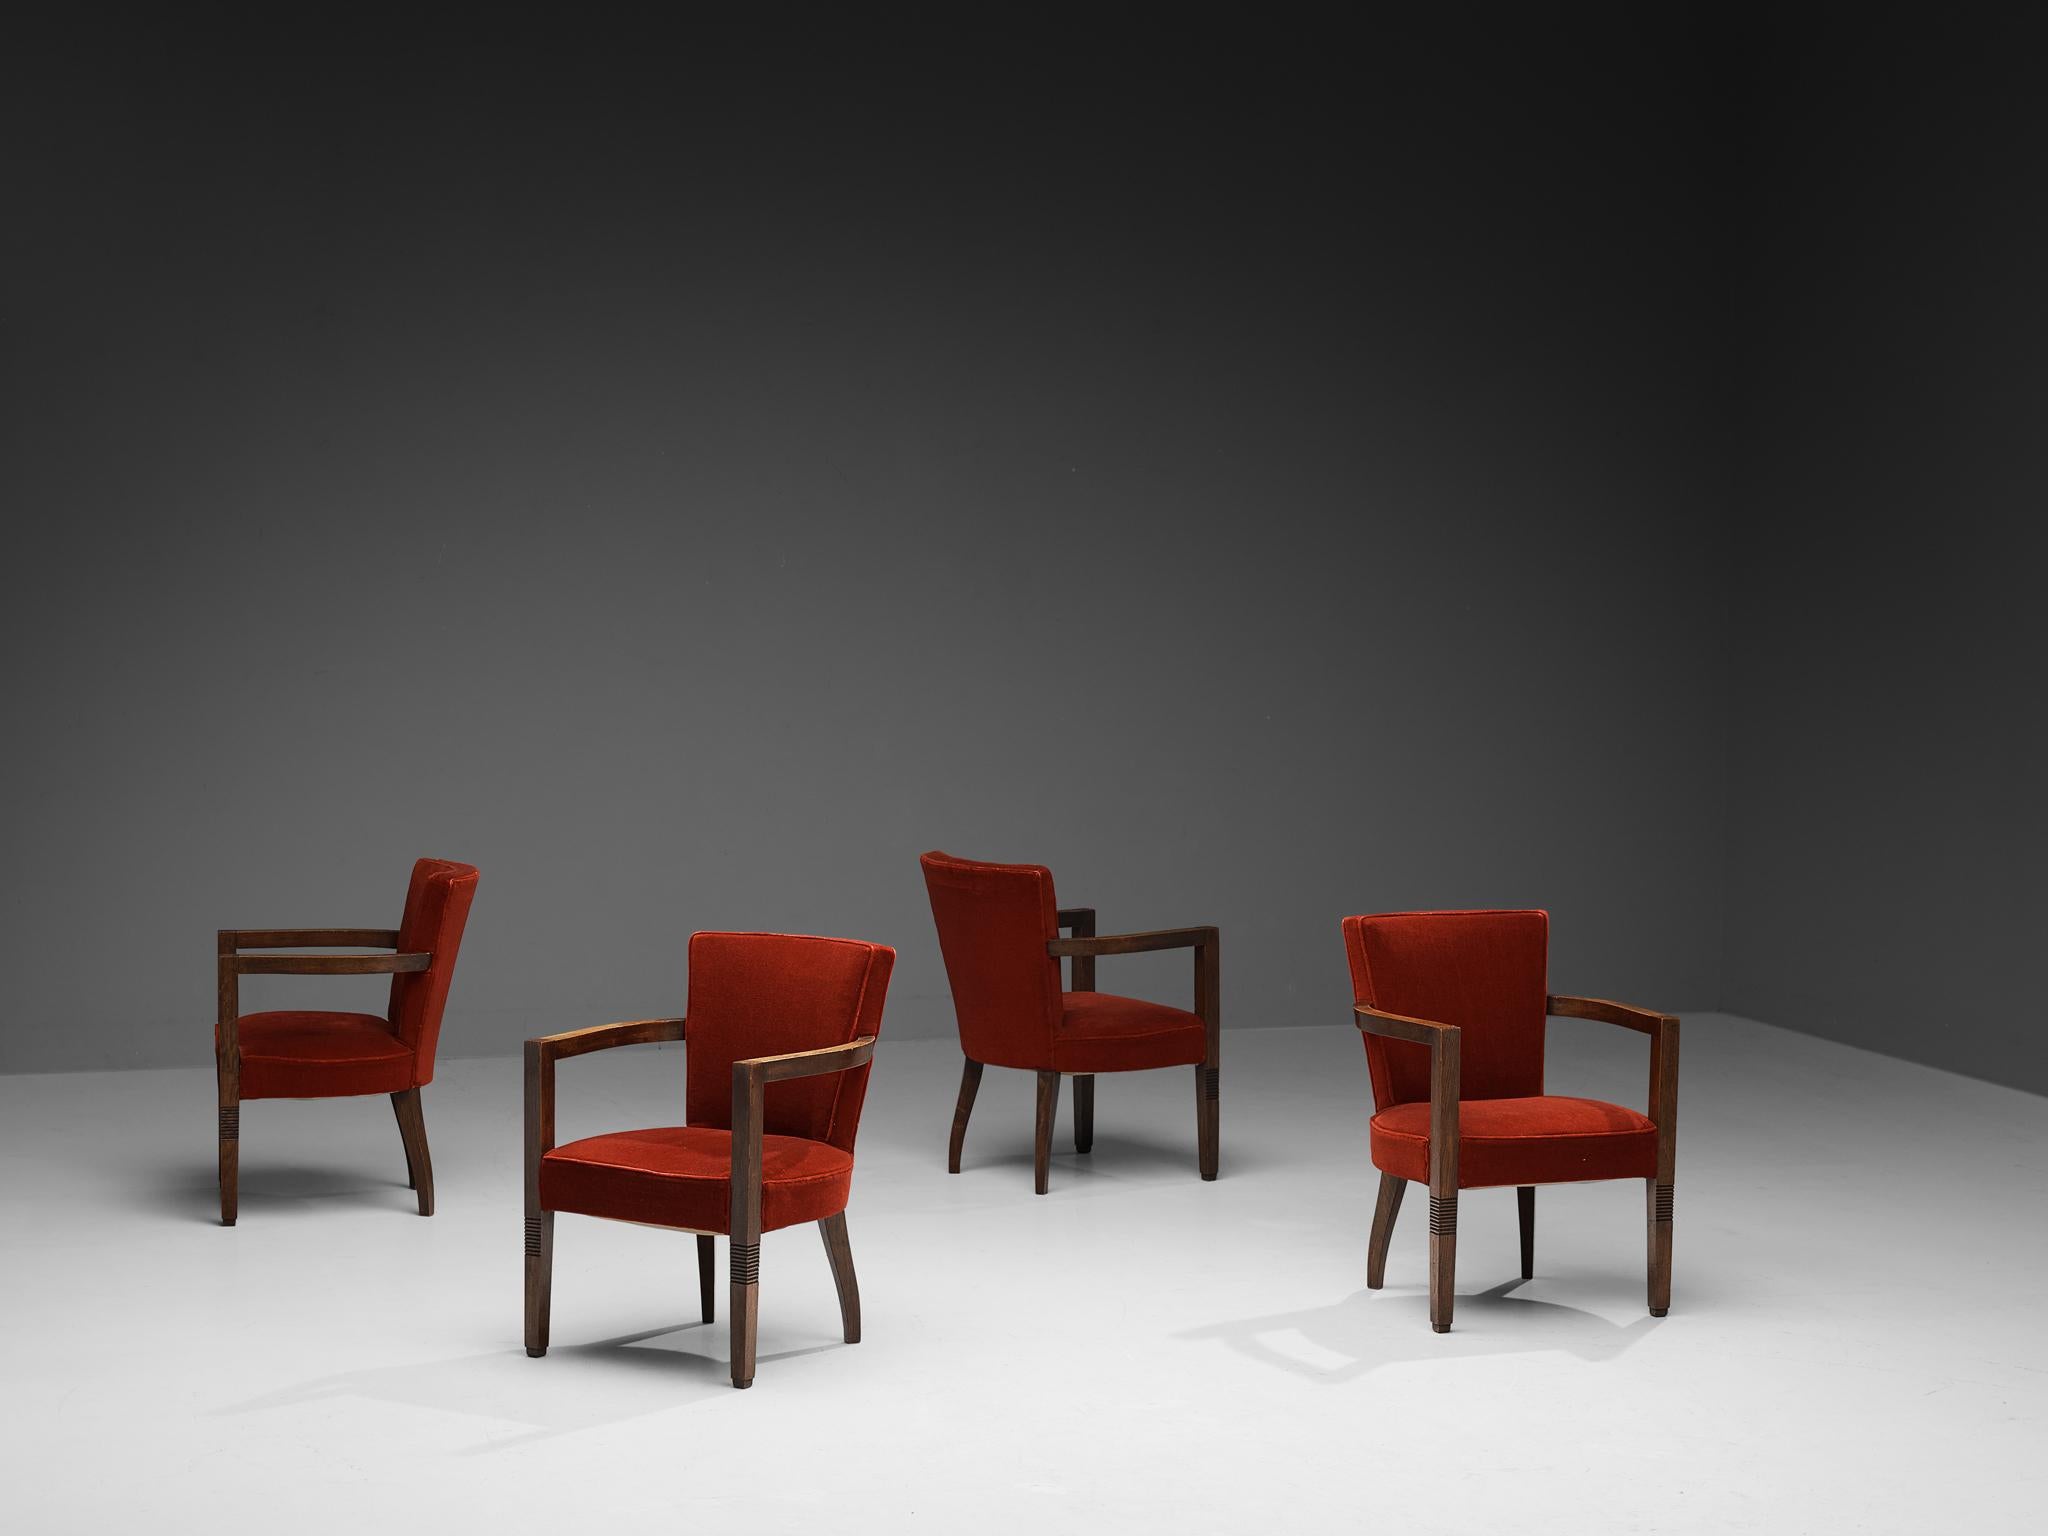 Charles Dudouyt, set of four armchairs, red velvet, stained oak, France, 1940s. 

This set of four Art Deco dining or armchairs is upholstered with deep red velvet fabric. The frame is made of solid stained oak and features tapered, carved legs. The